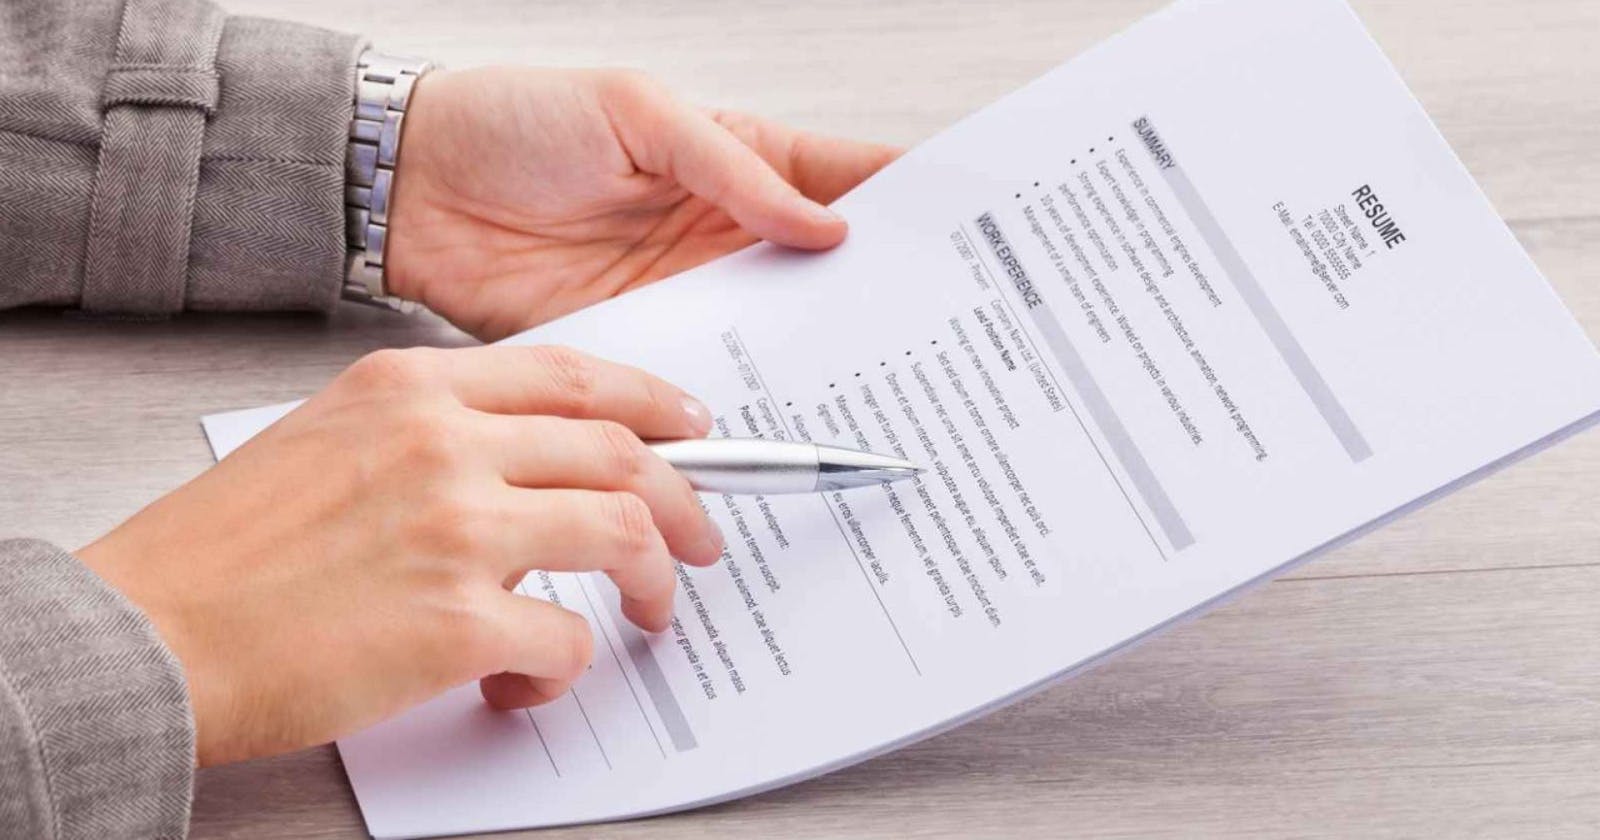 IMP tips for writing your resume effectively